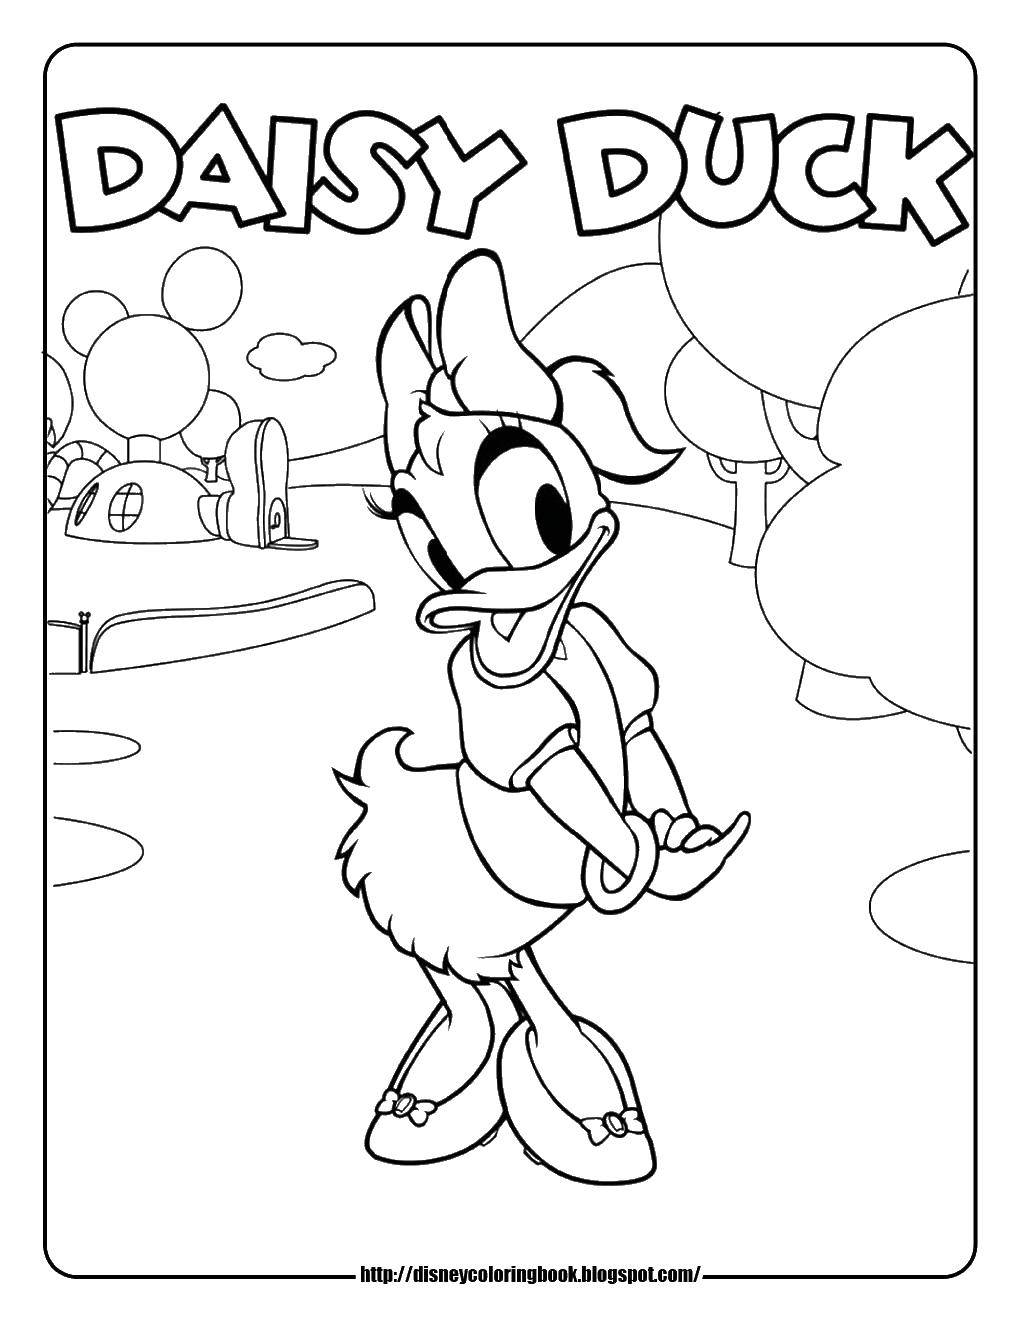 Coloring Daisy. Category cartoons. Tags:  duck, skirt, bowknot.